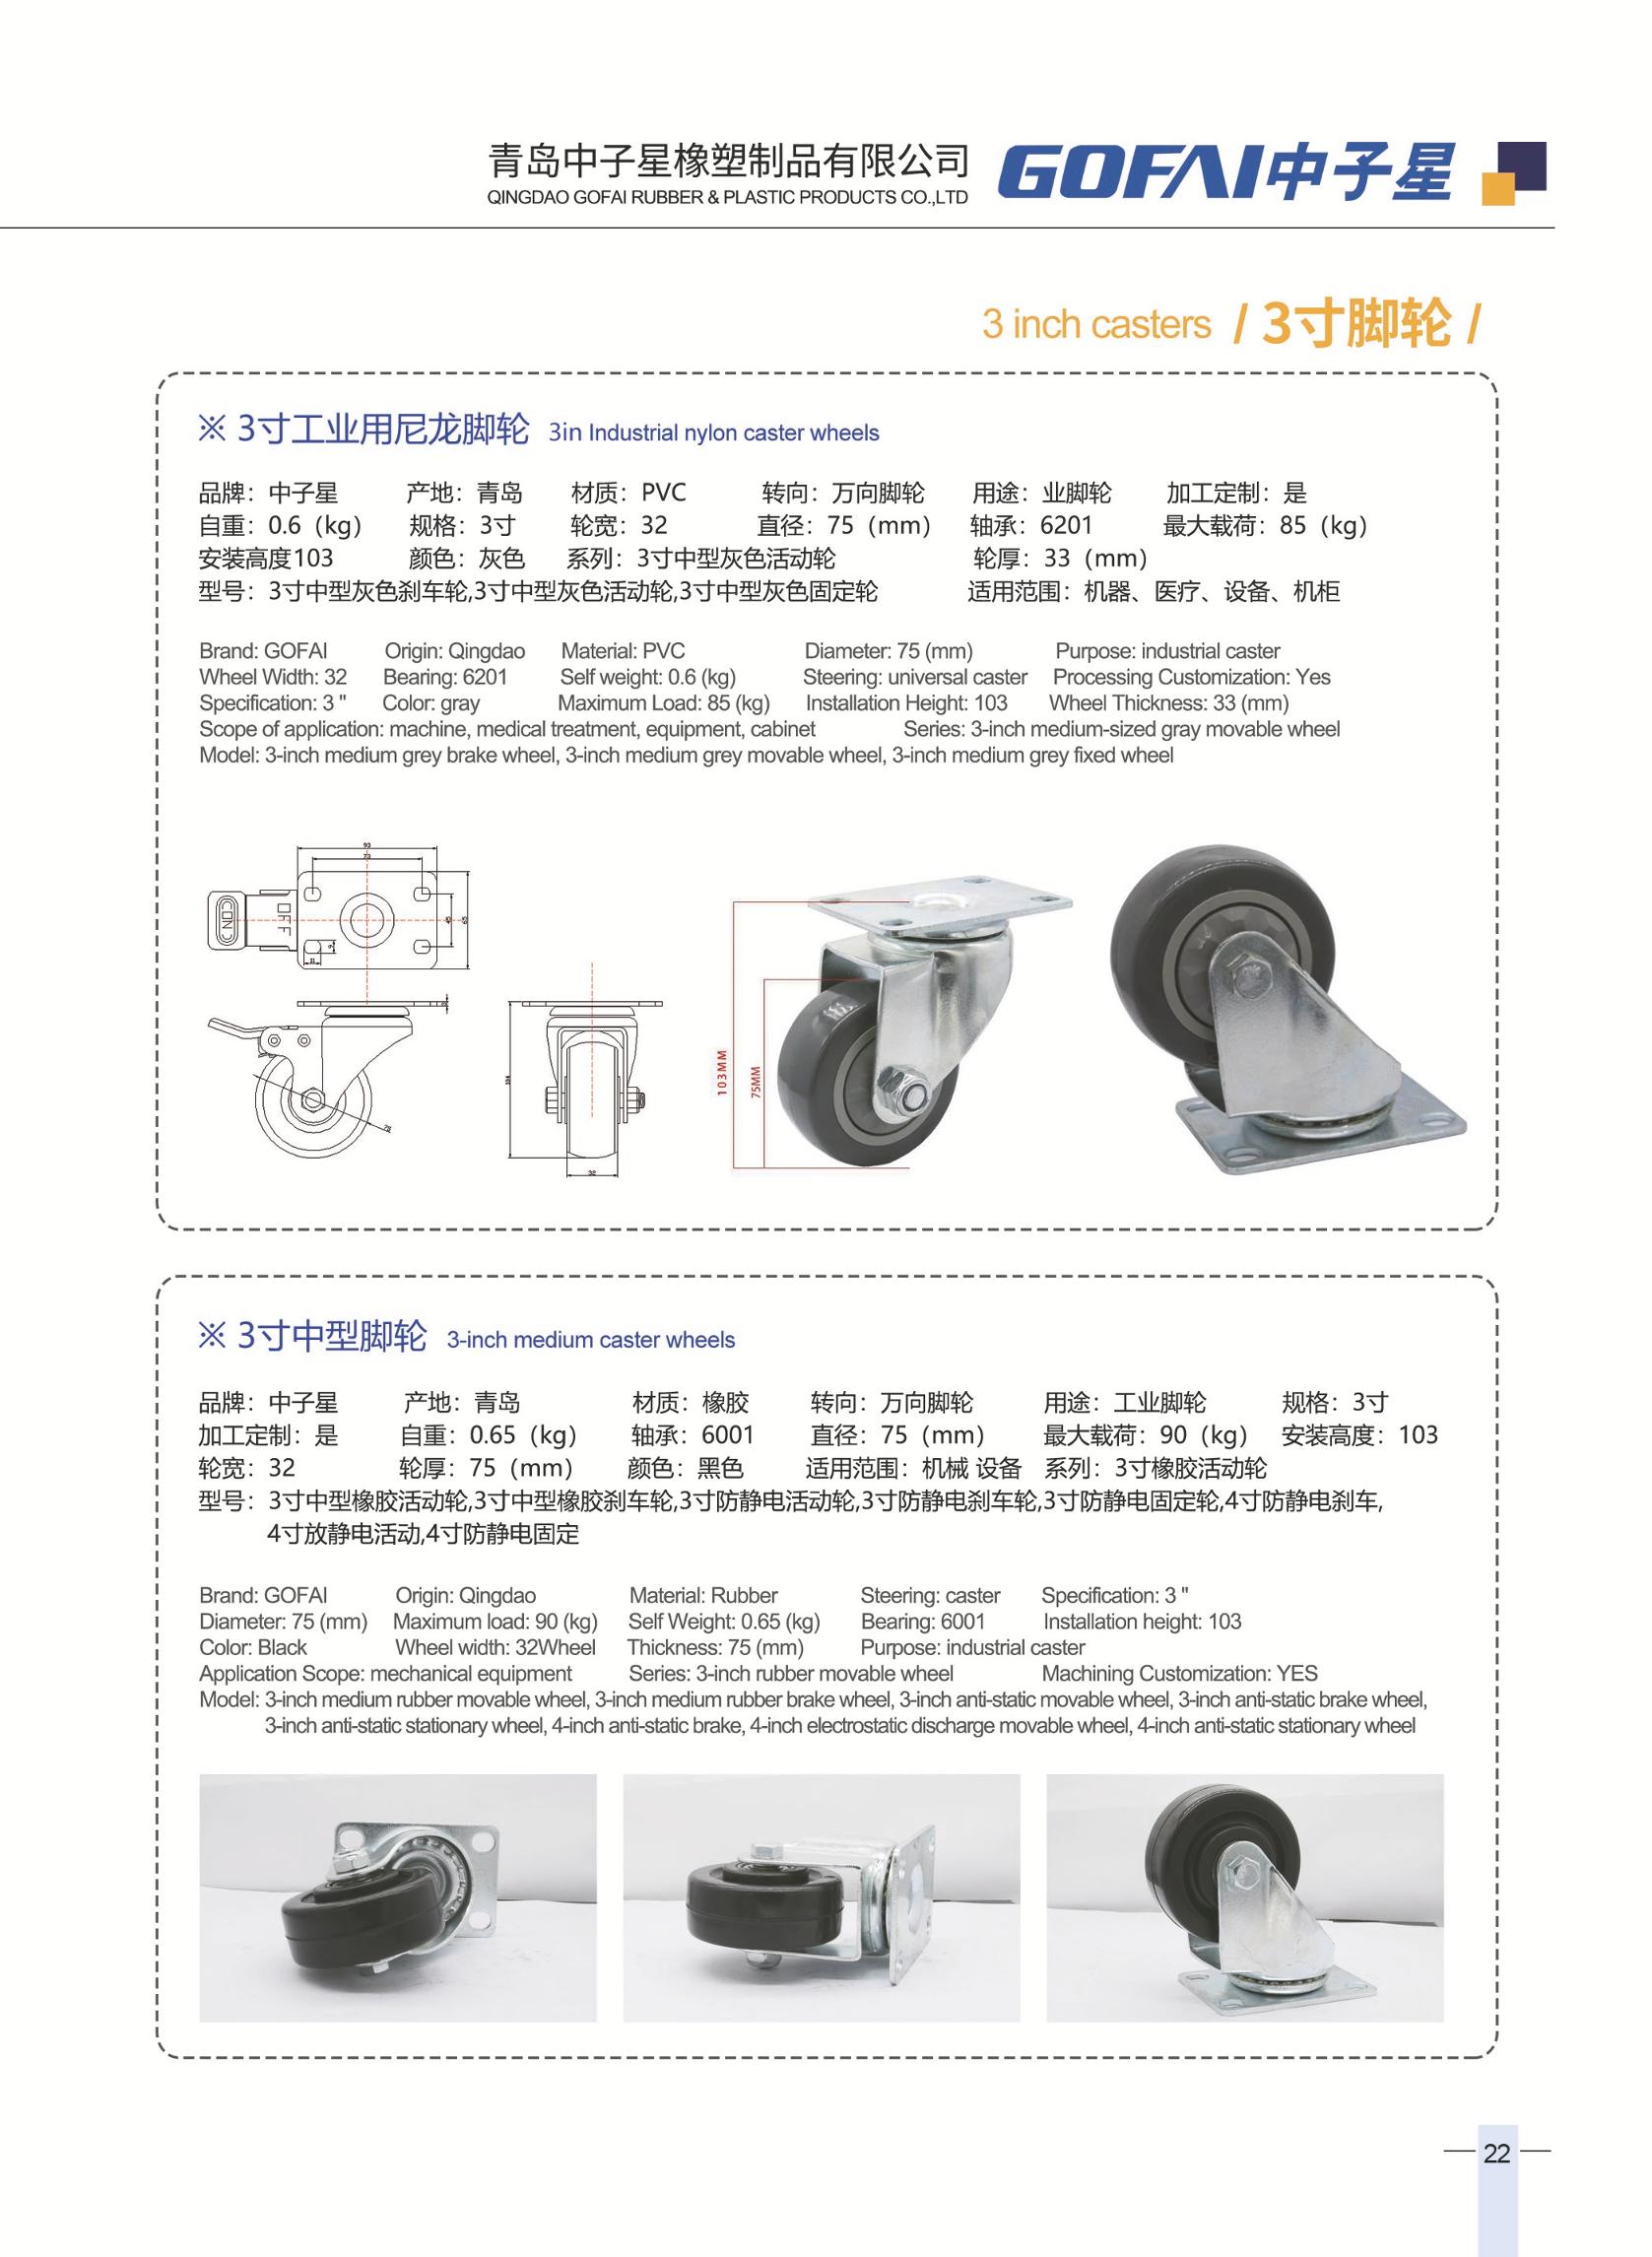 Gofai based foot cups and caster wheels_24.jpg